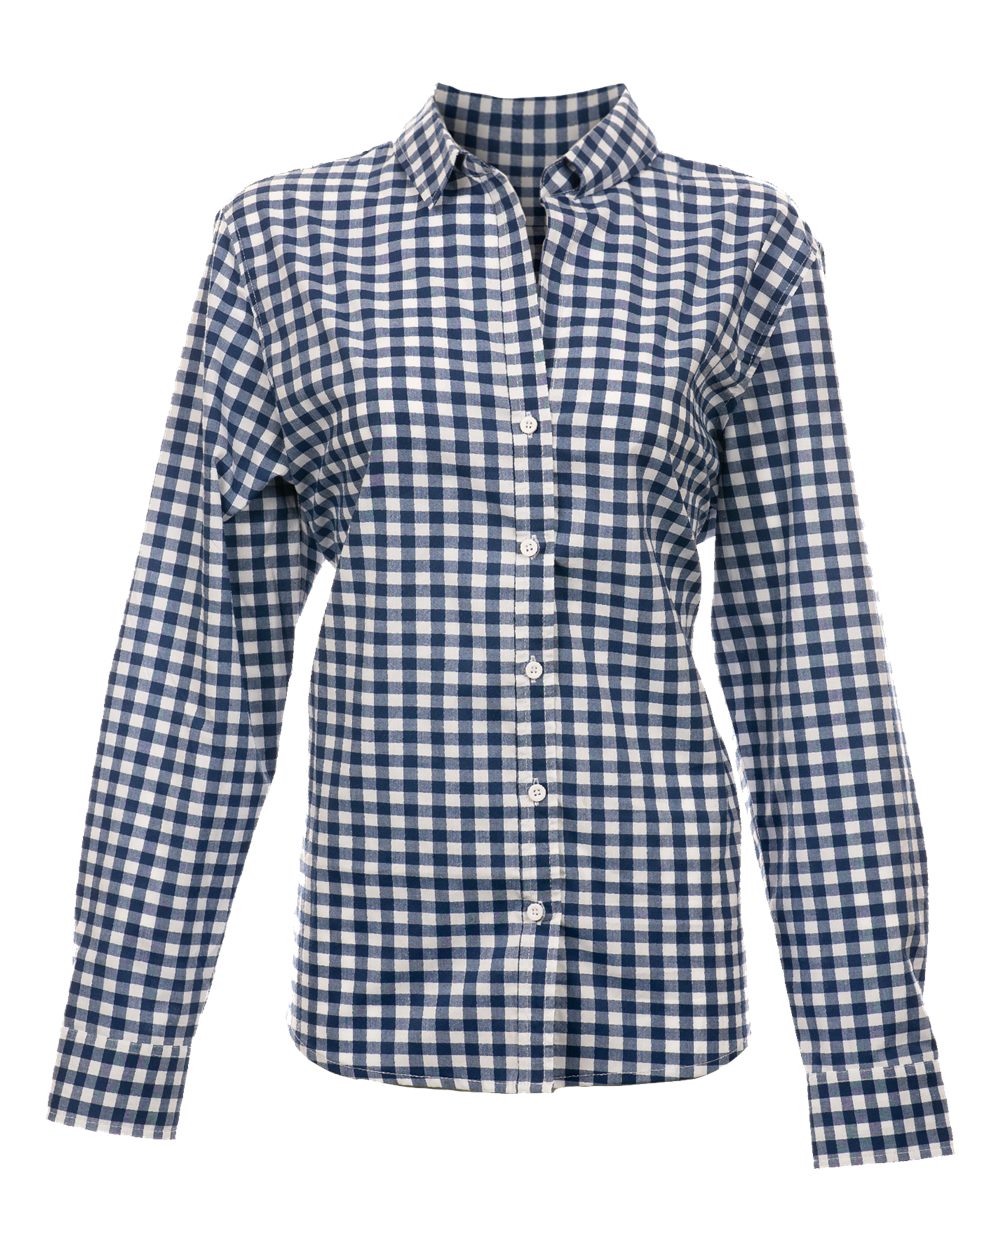 click to view Navy/ White Gingham